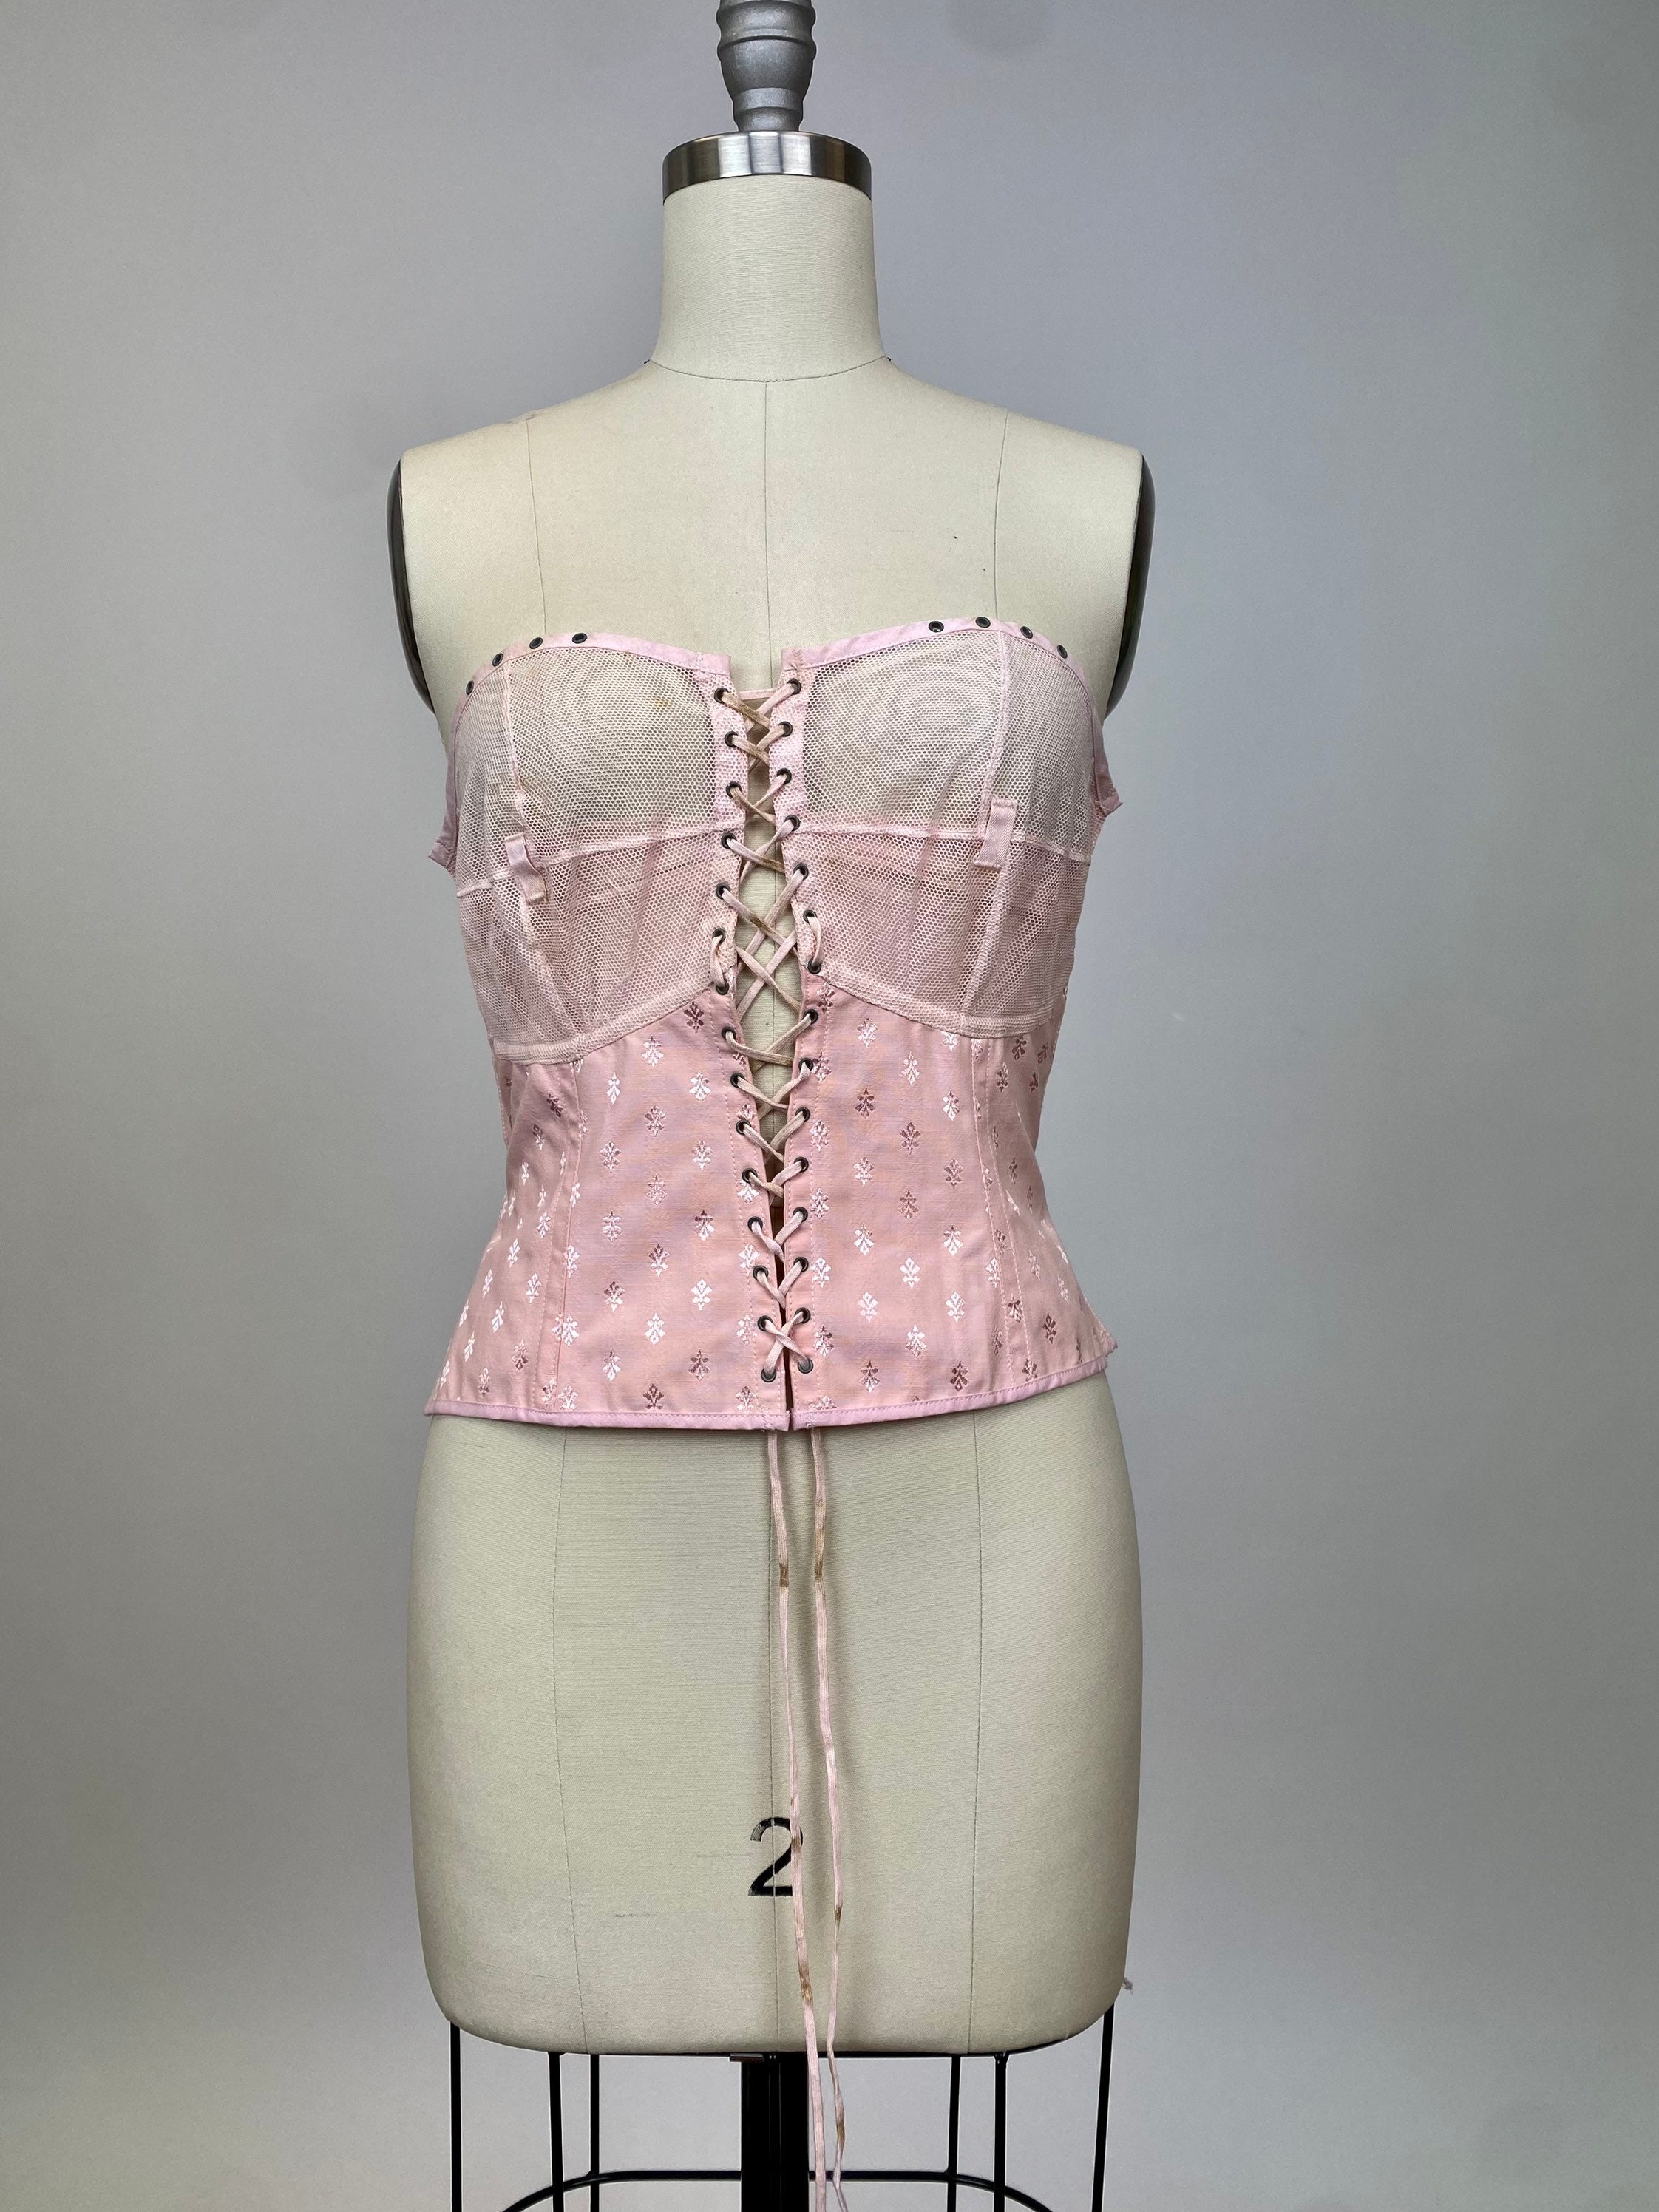 Rare Vintage Early 1900s Spirella Corset, Bustier, Lace up Undergarment,  Body Shaper, Pale Blush Pink Front Panel -  Finland